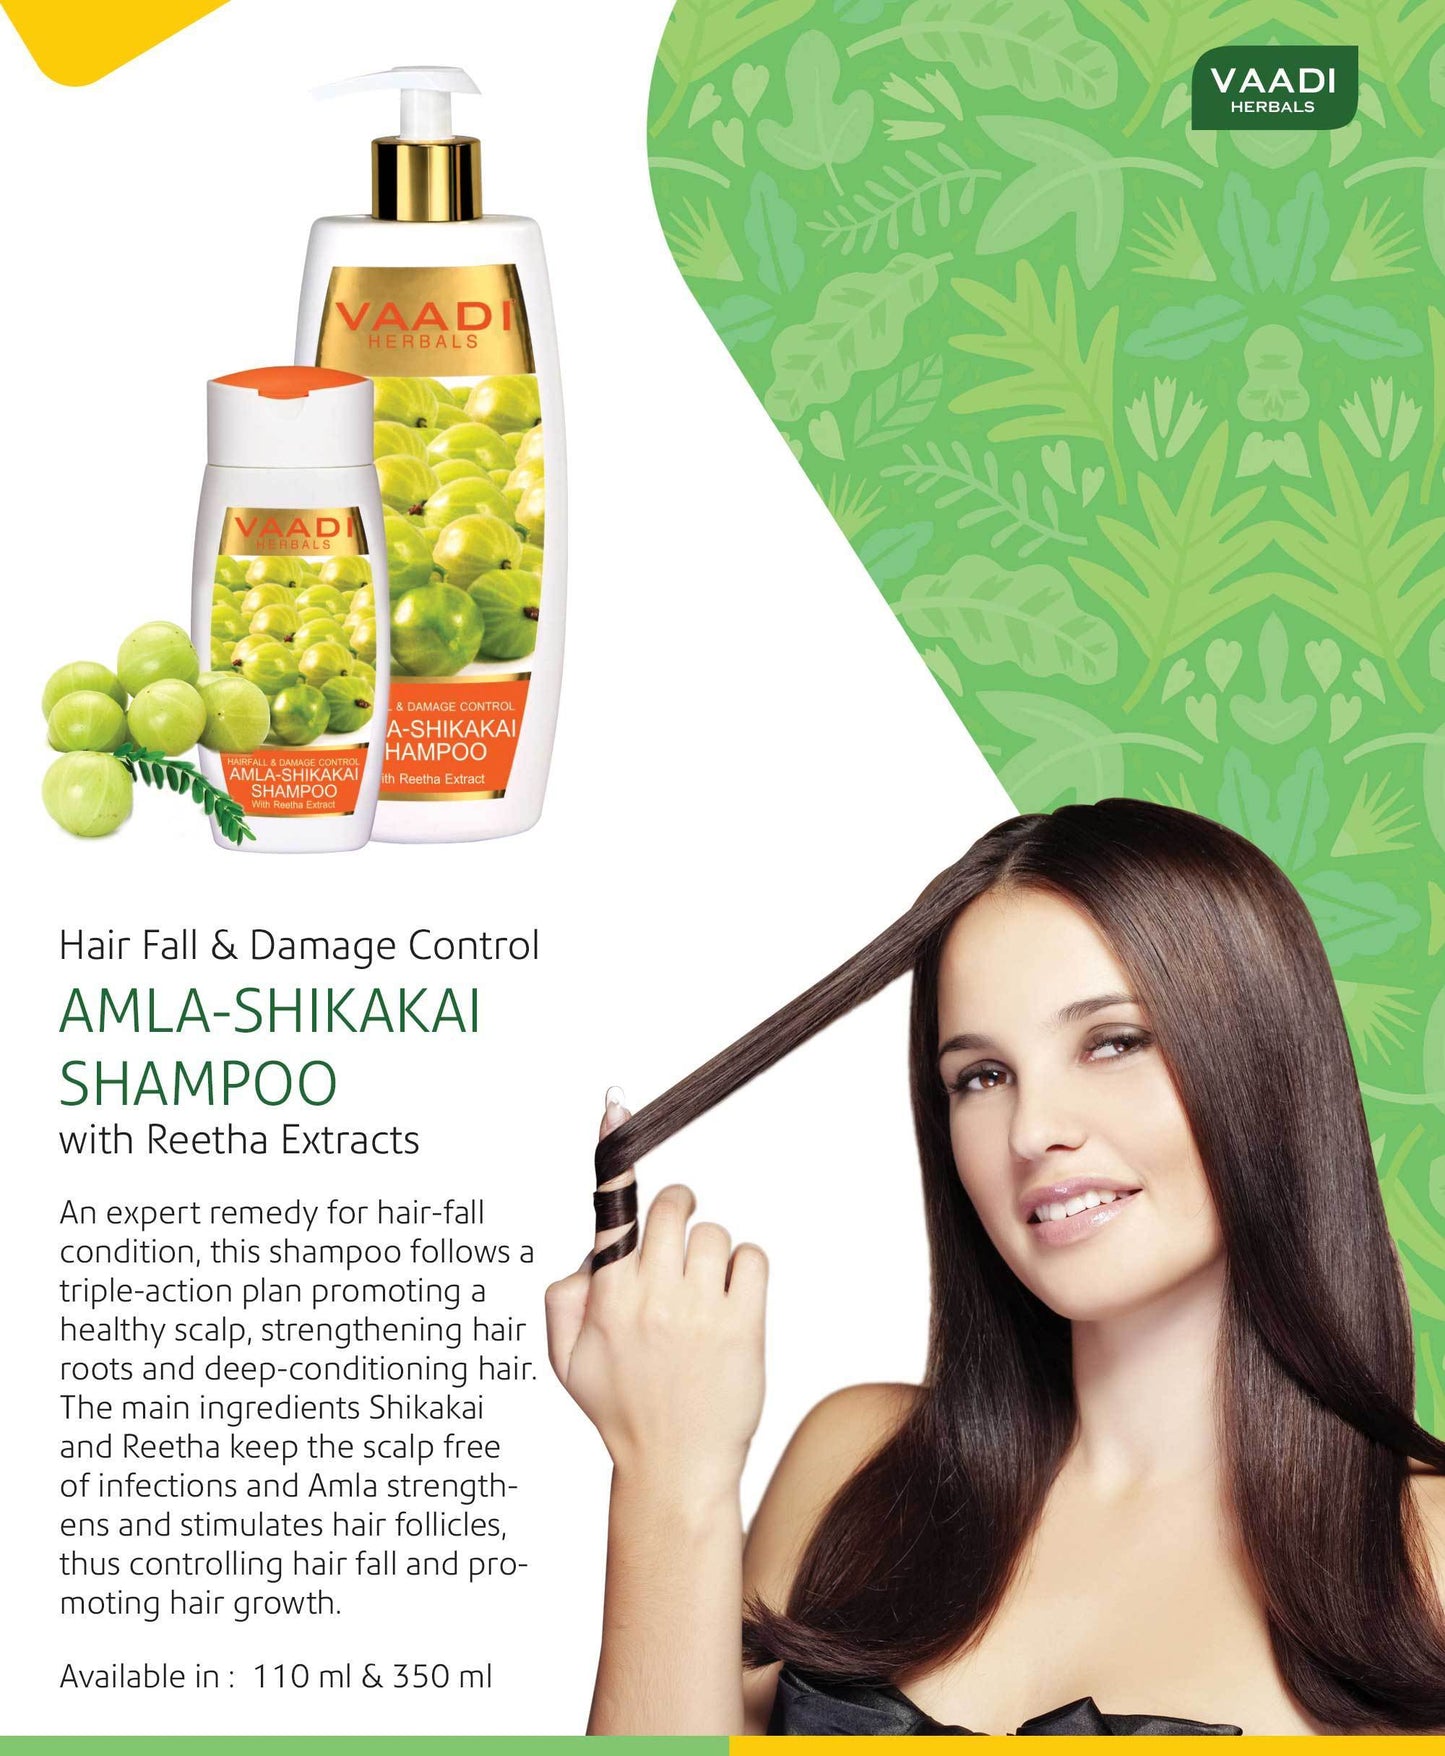 Hairfall & Damage Control Organic Shampoo (Indian Gooseberry Extract) - Promotes Hair Growth - Adds Shine to Hair (350 ml/12 fl oz)